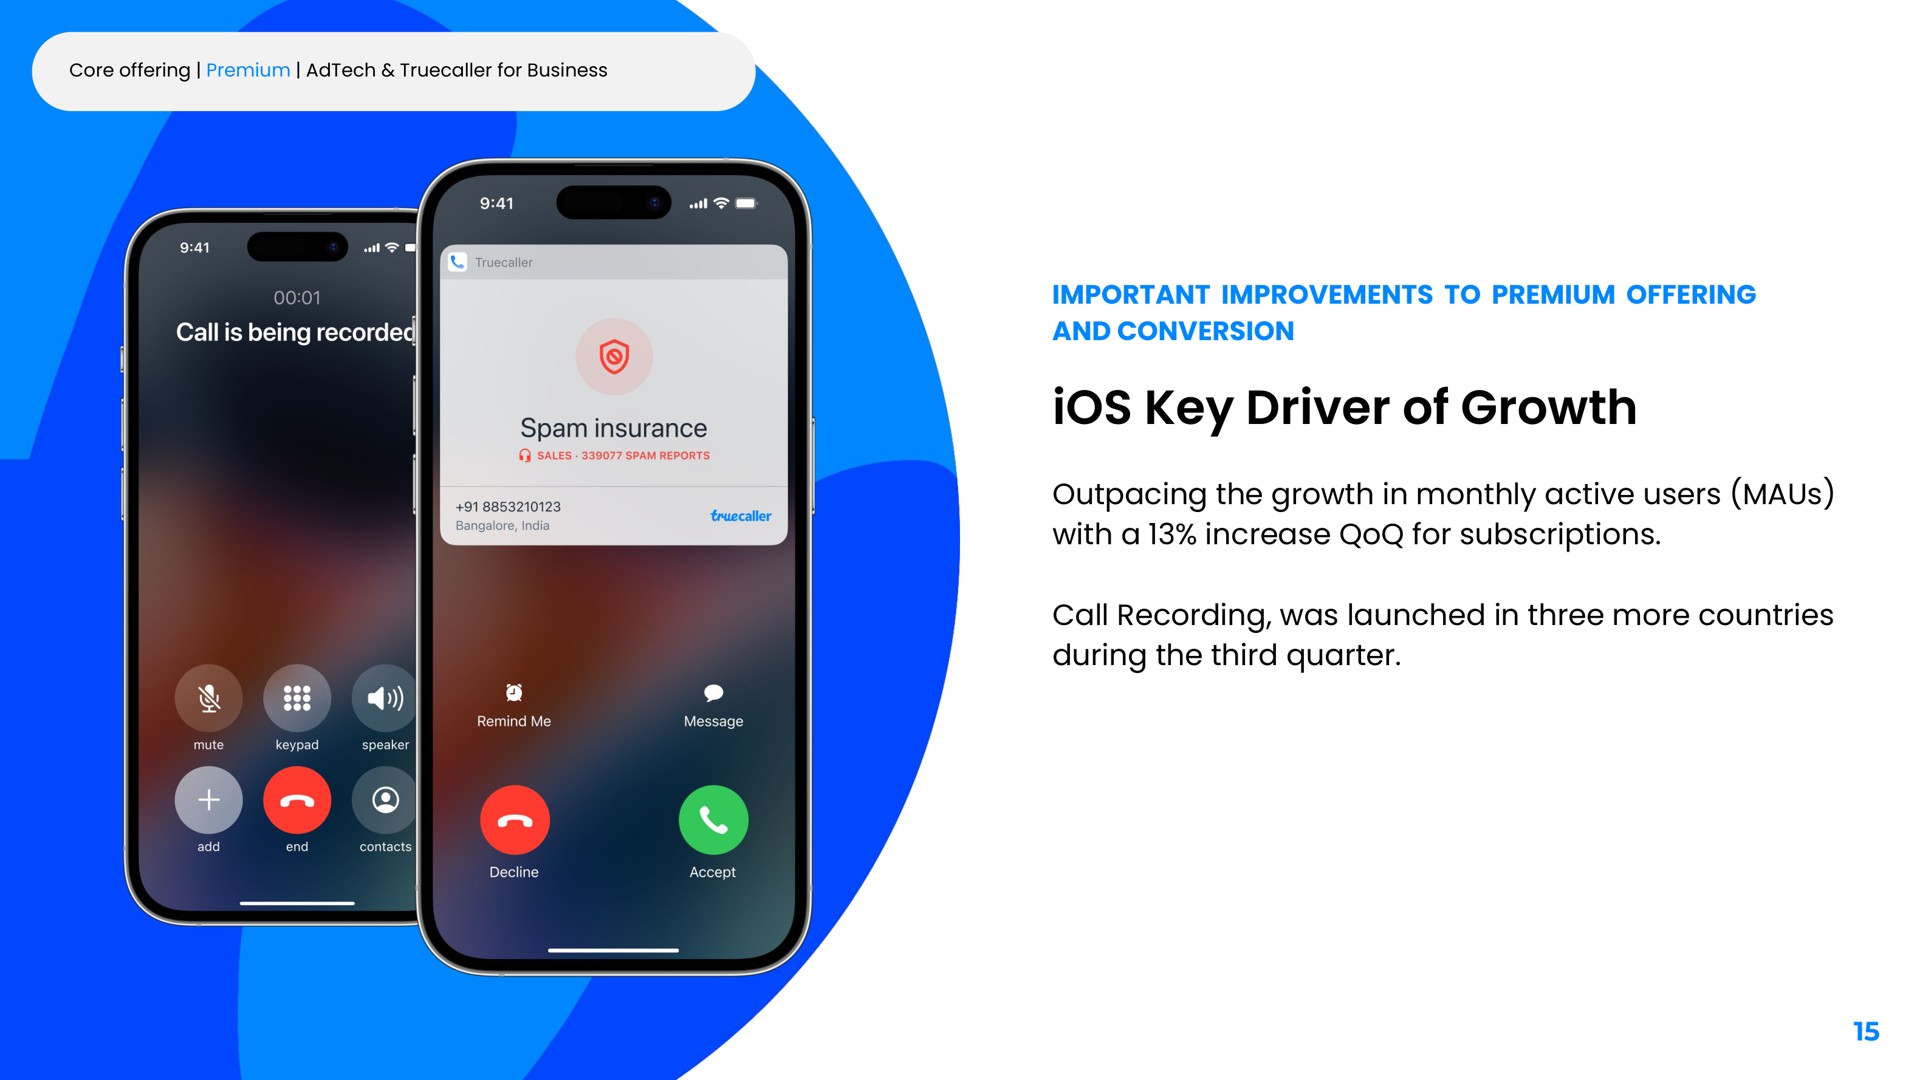 ios key driver of growth a outpacing the in monthly active users | Truecaller